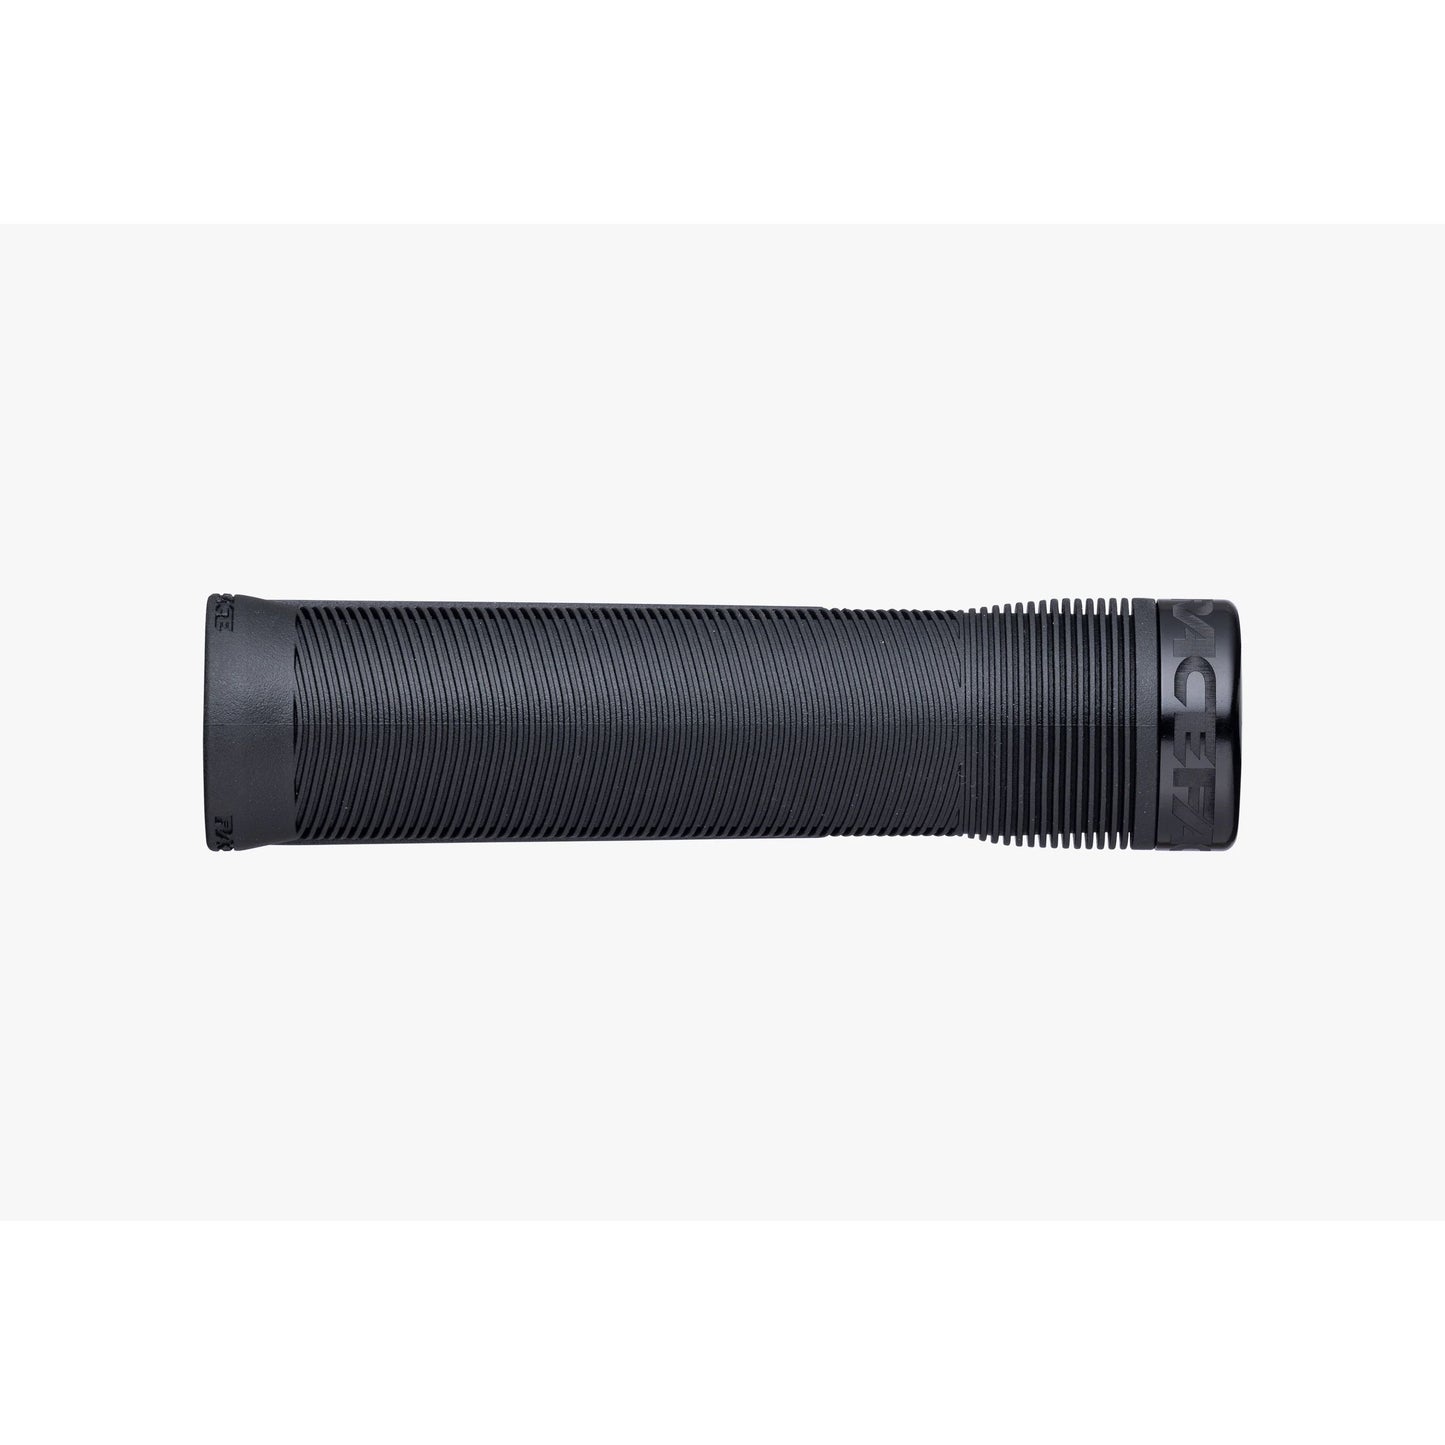 Race Face Chester Lock On Grips - Black With Black Clamps - Single Lock On Grips - 31mm